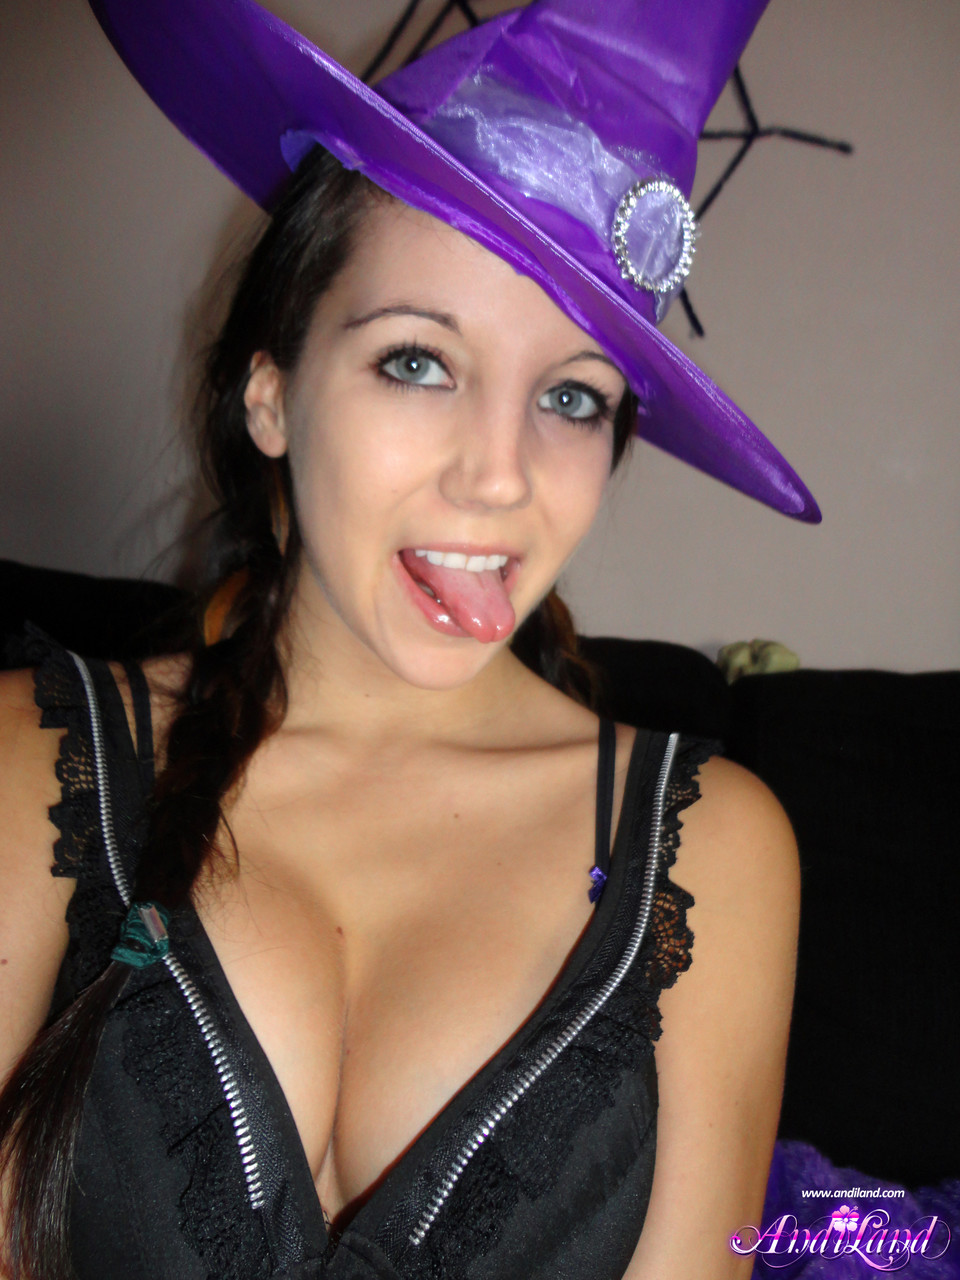 Teen amateur Andi Land teases during upskirt action in a Halloween outfit photo porno #428432669